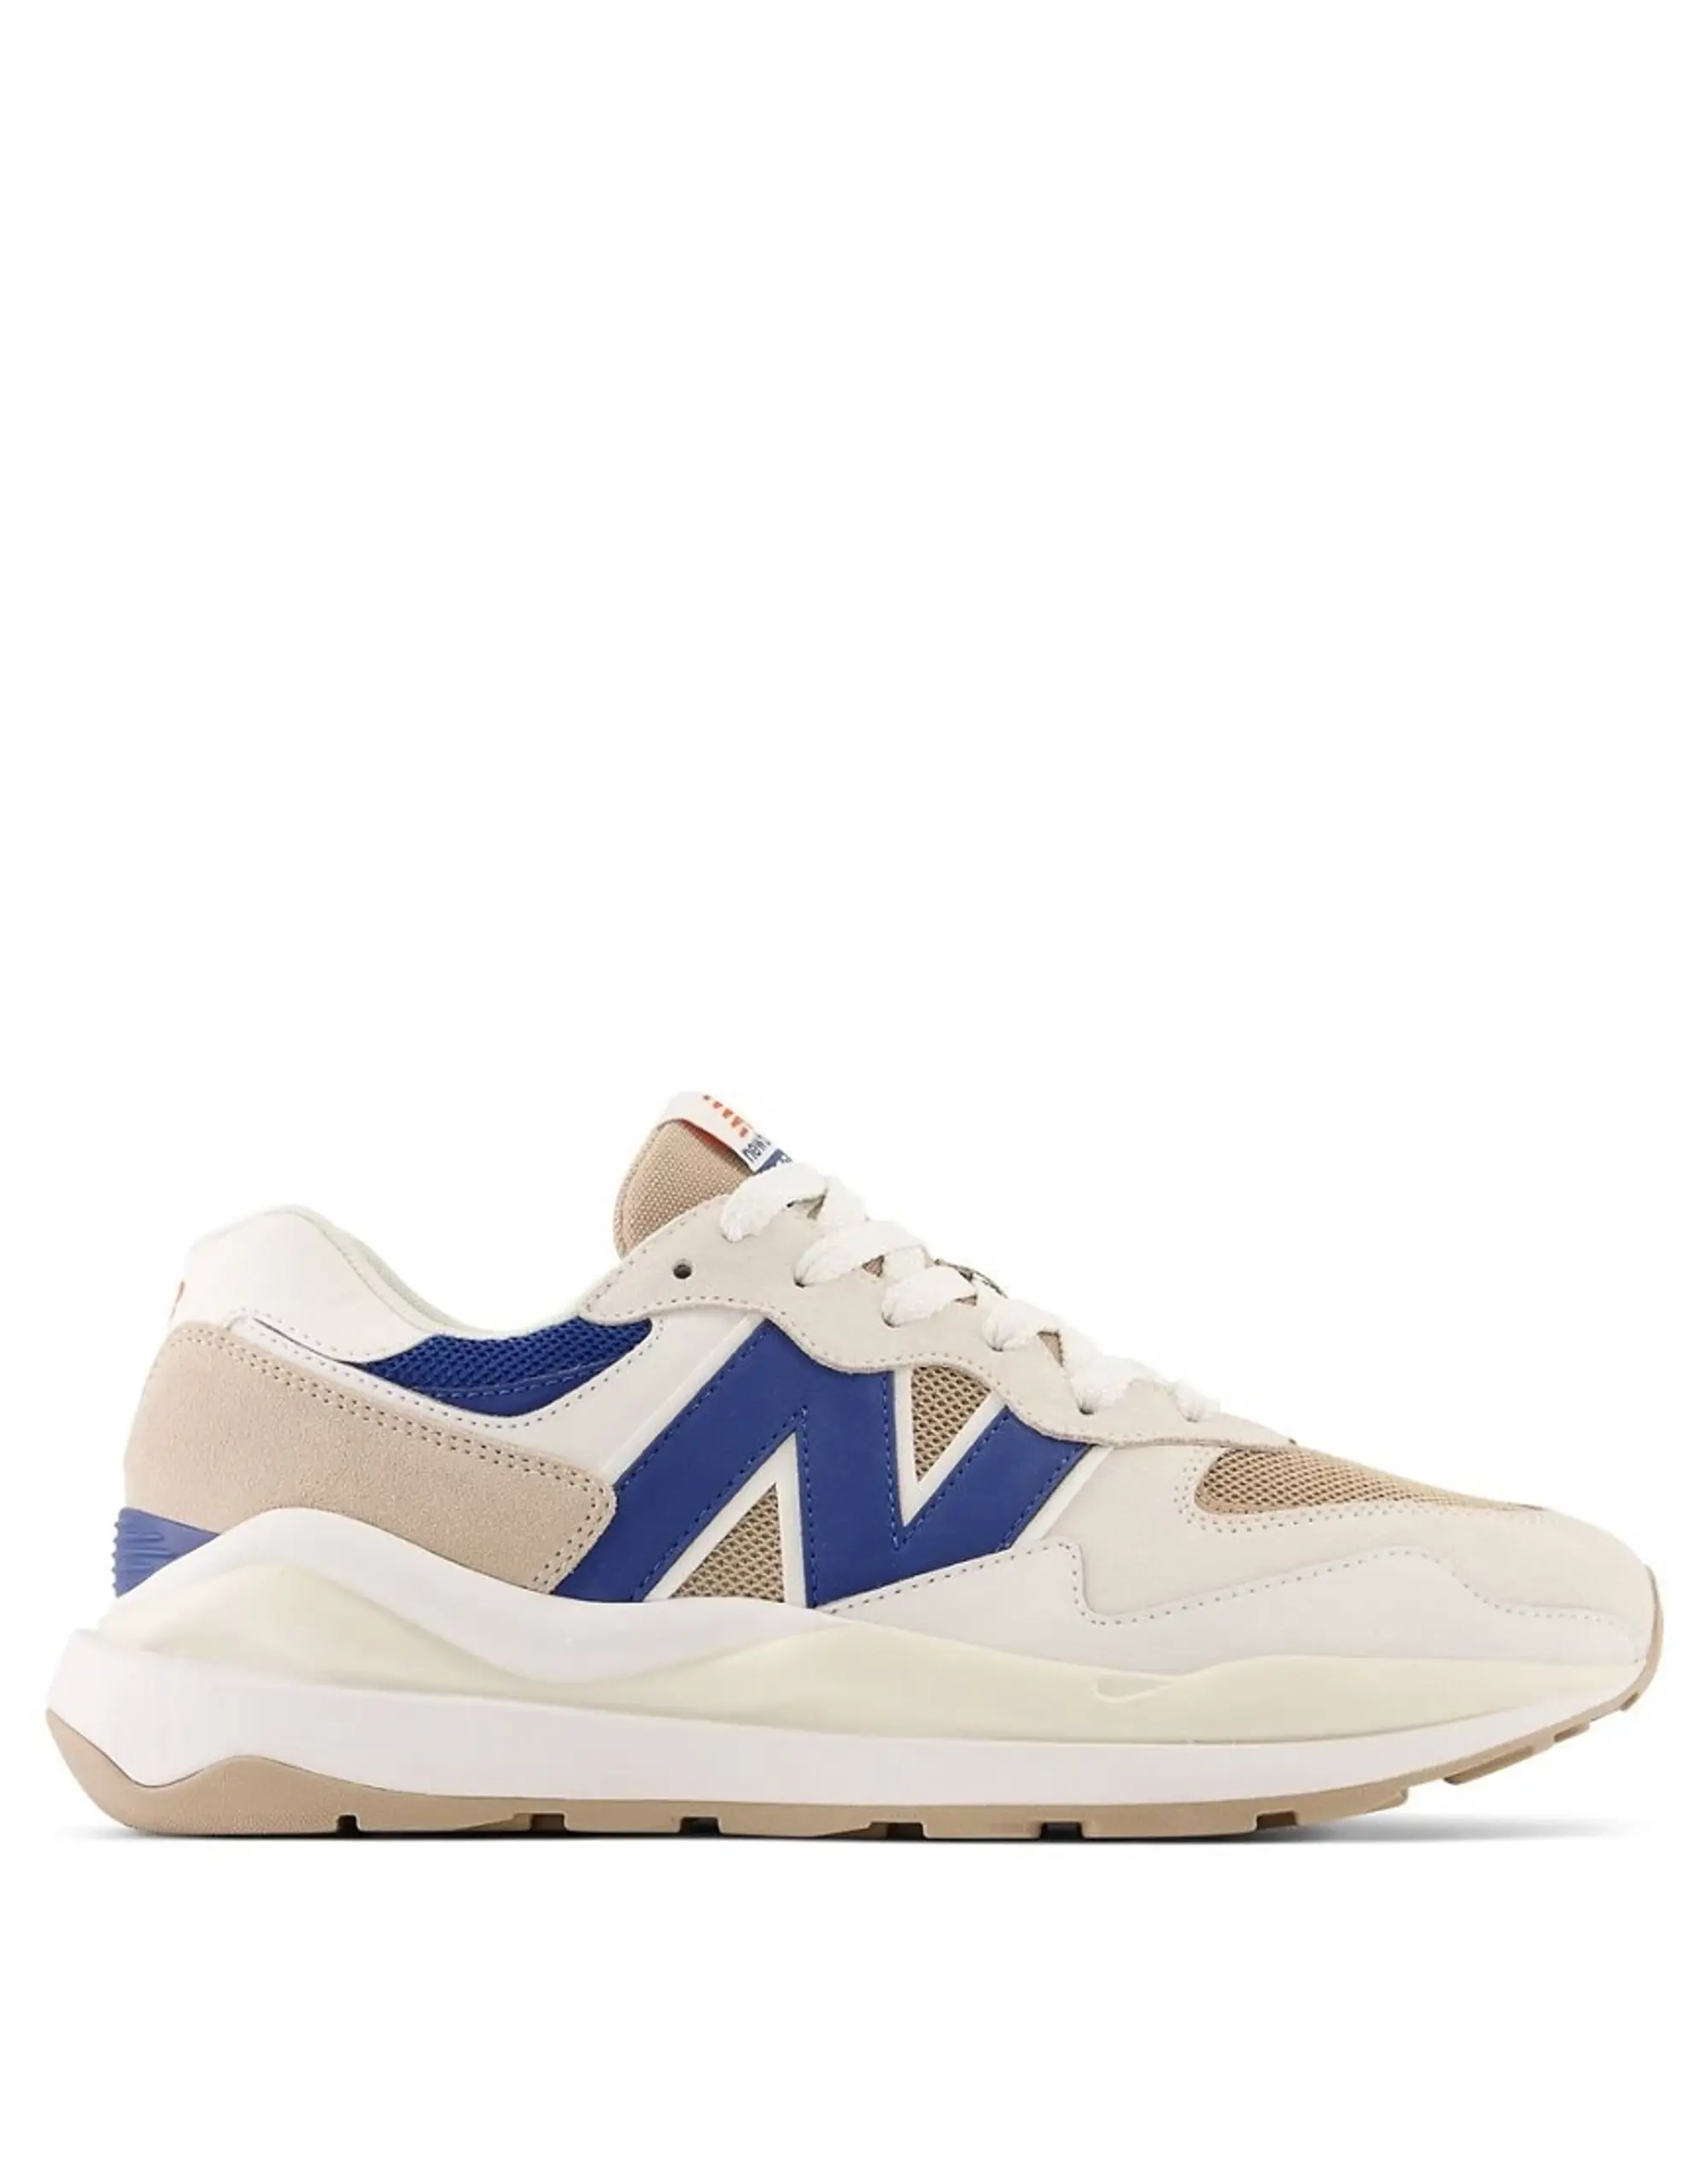 New Balance Men's 5740 in White/Blue Suede/Mesh